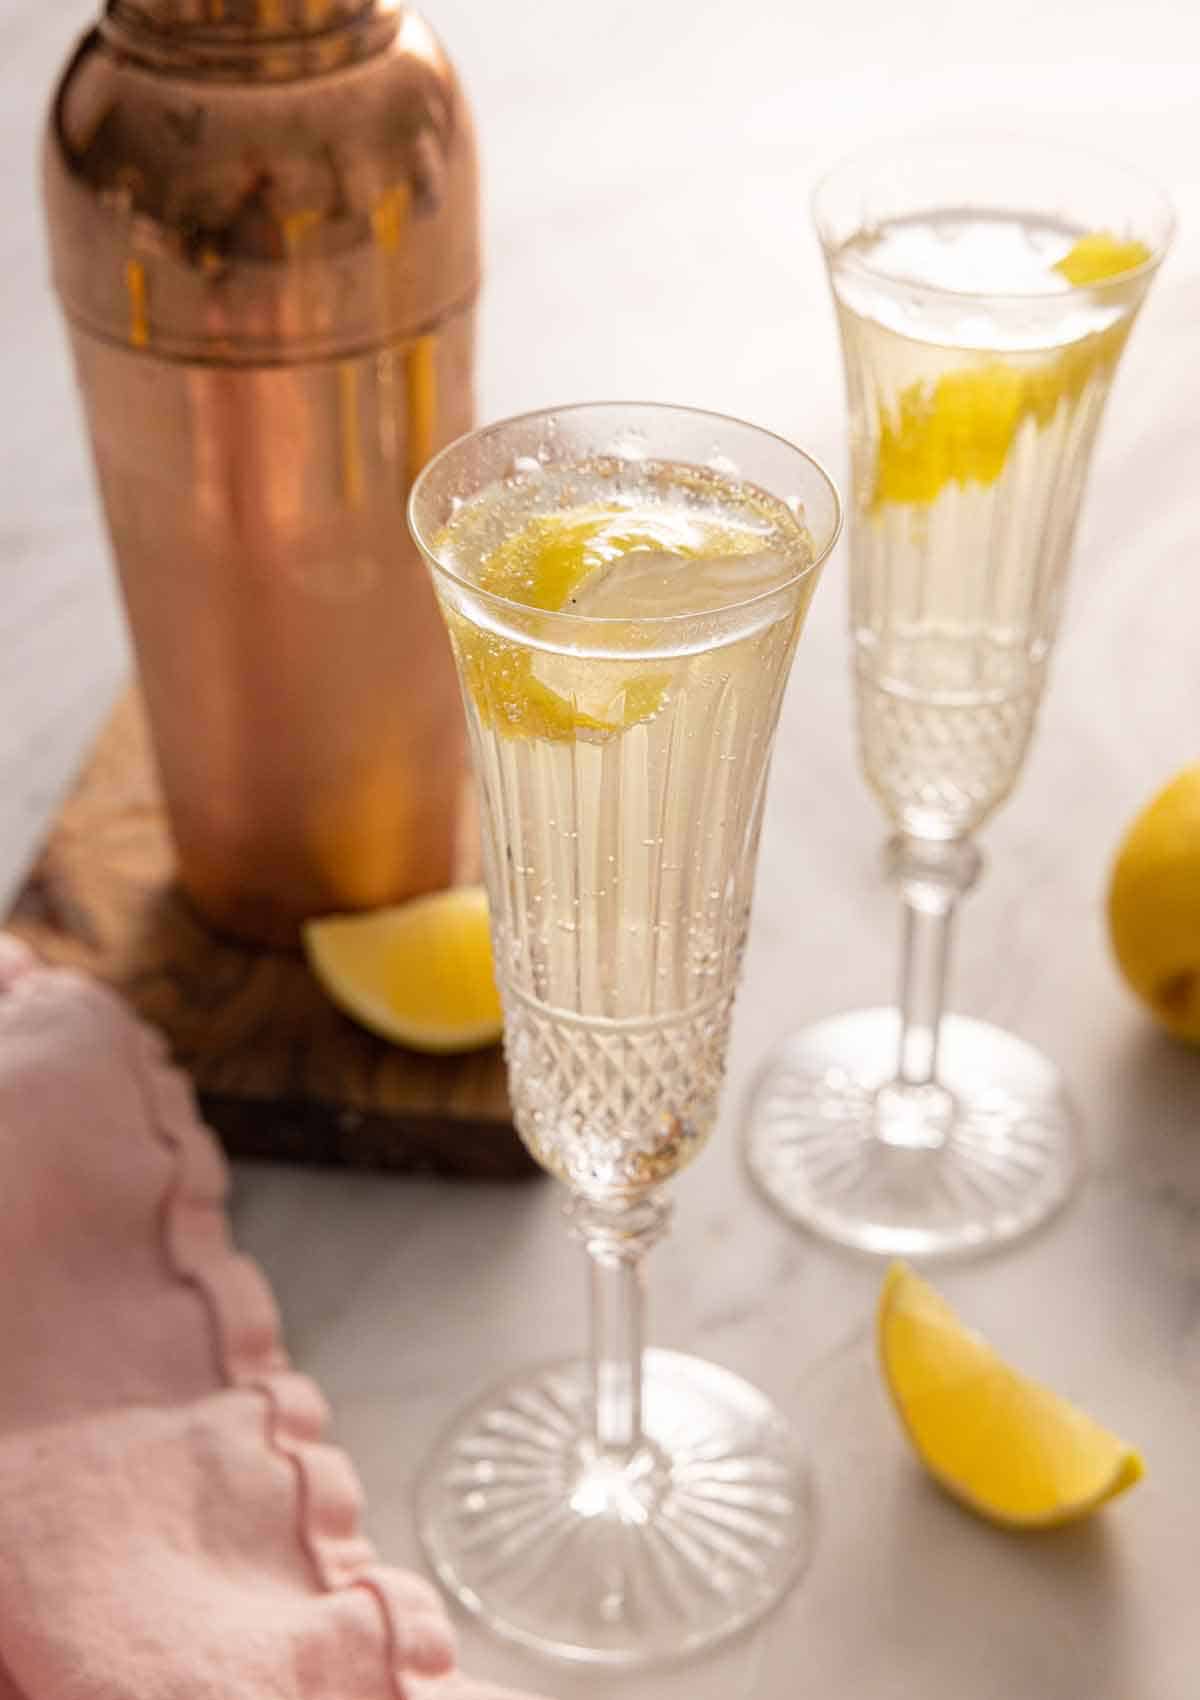 Two champagne flutes with French 75 with a lemon twist garnish.